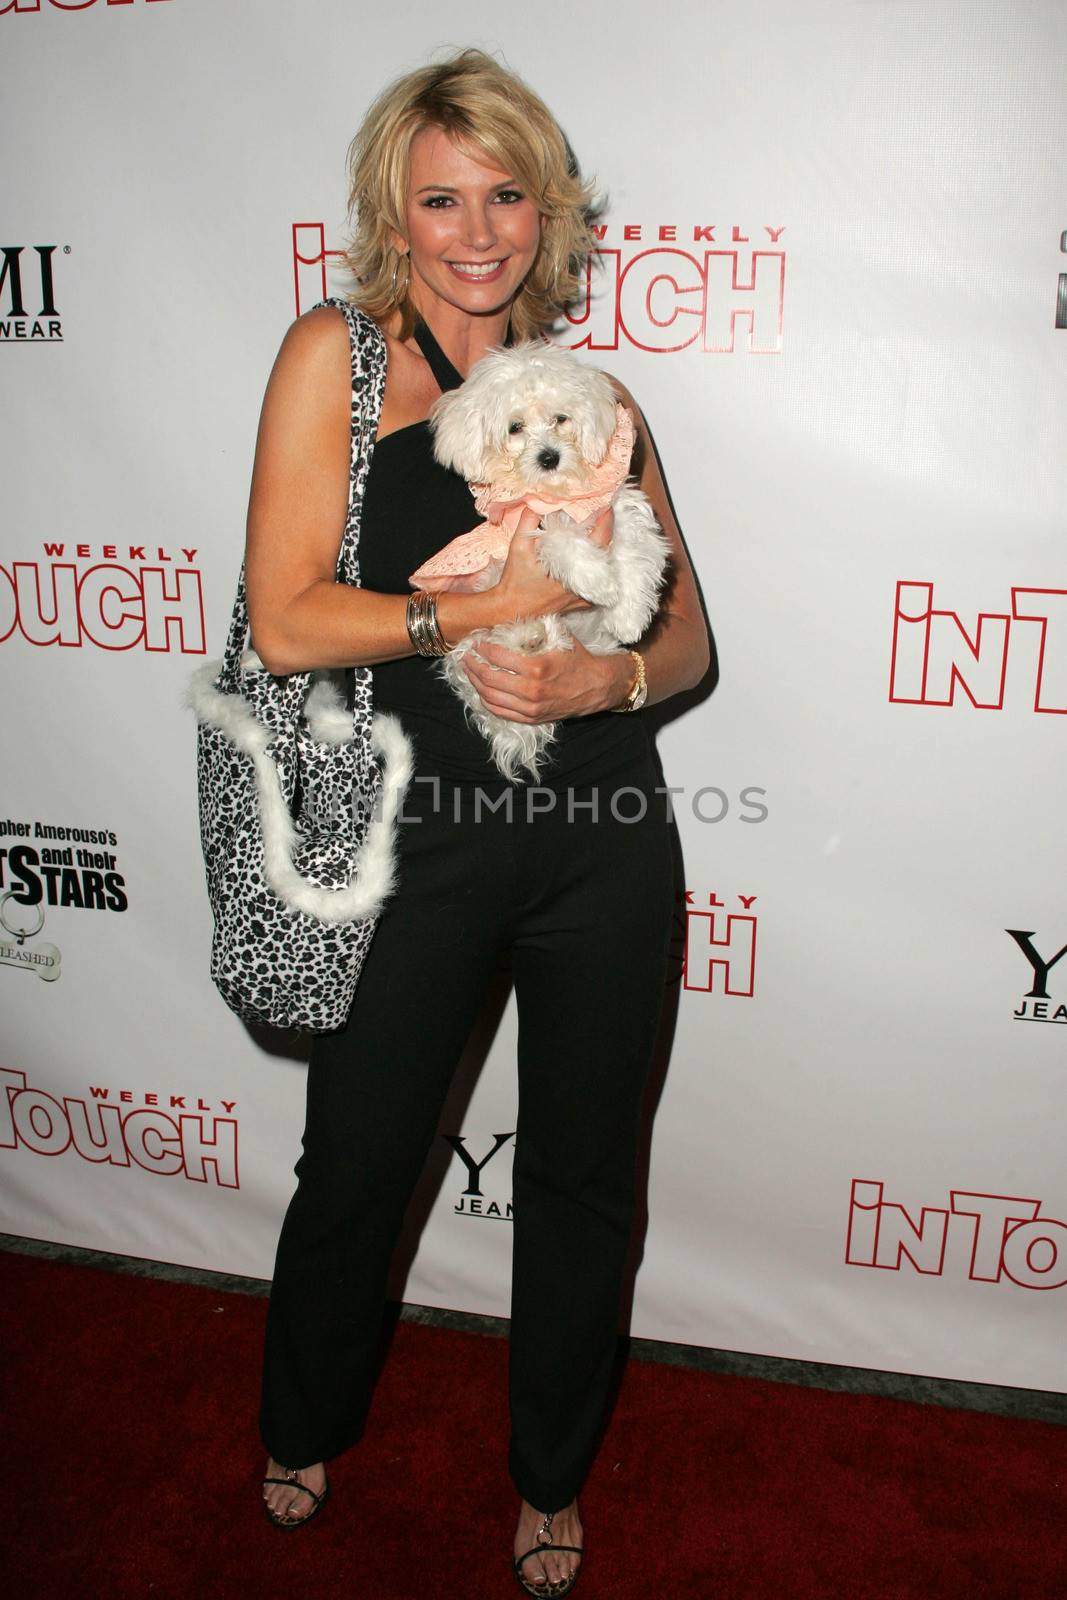 Tamie Sheffield at the In Touch Presents Pets And Their Stars Party, Cabana Club, Hollywood, CA 09-21-05